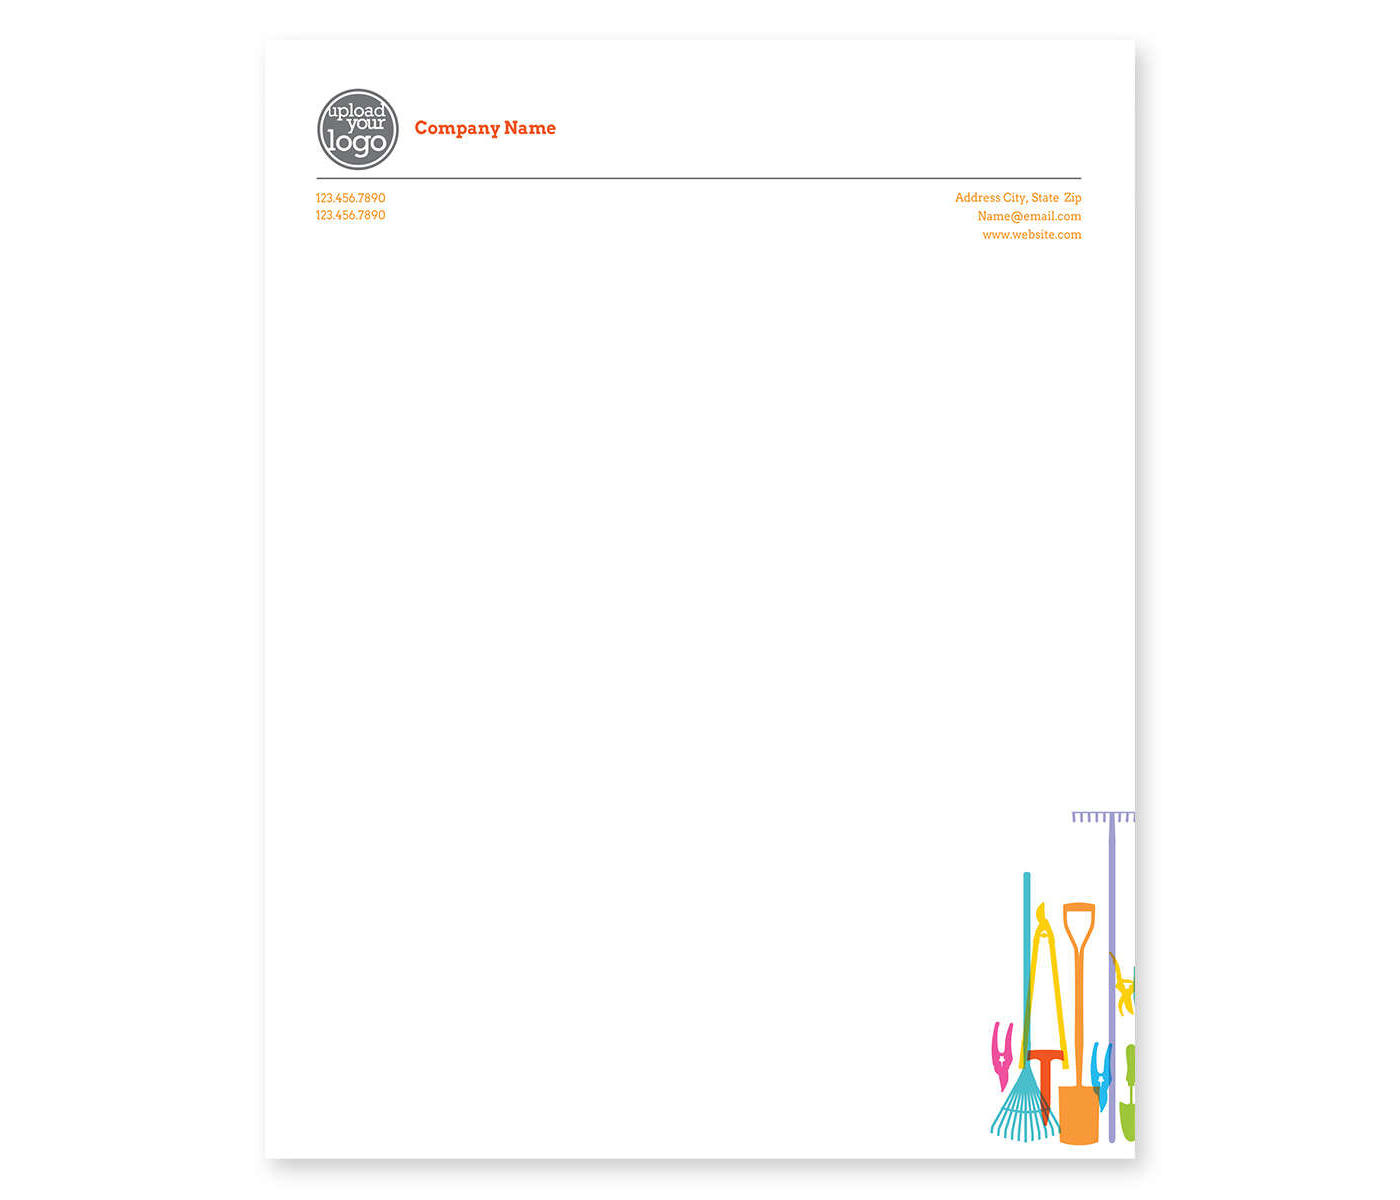 Perfectly Manicured Letterhead 8-1/2x11